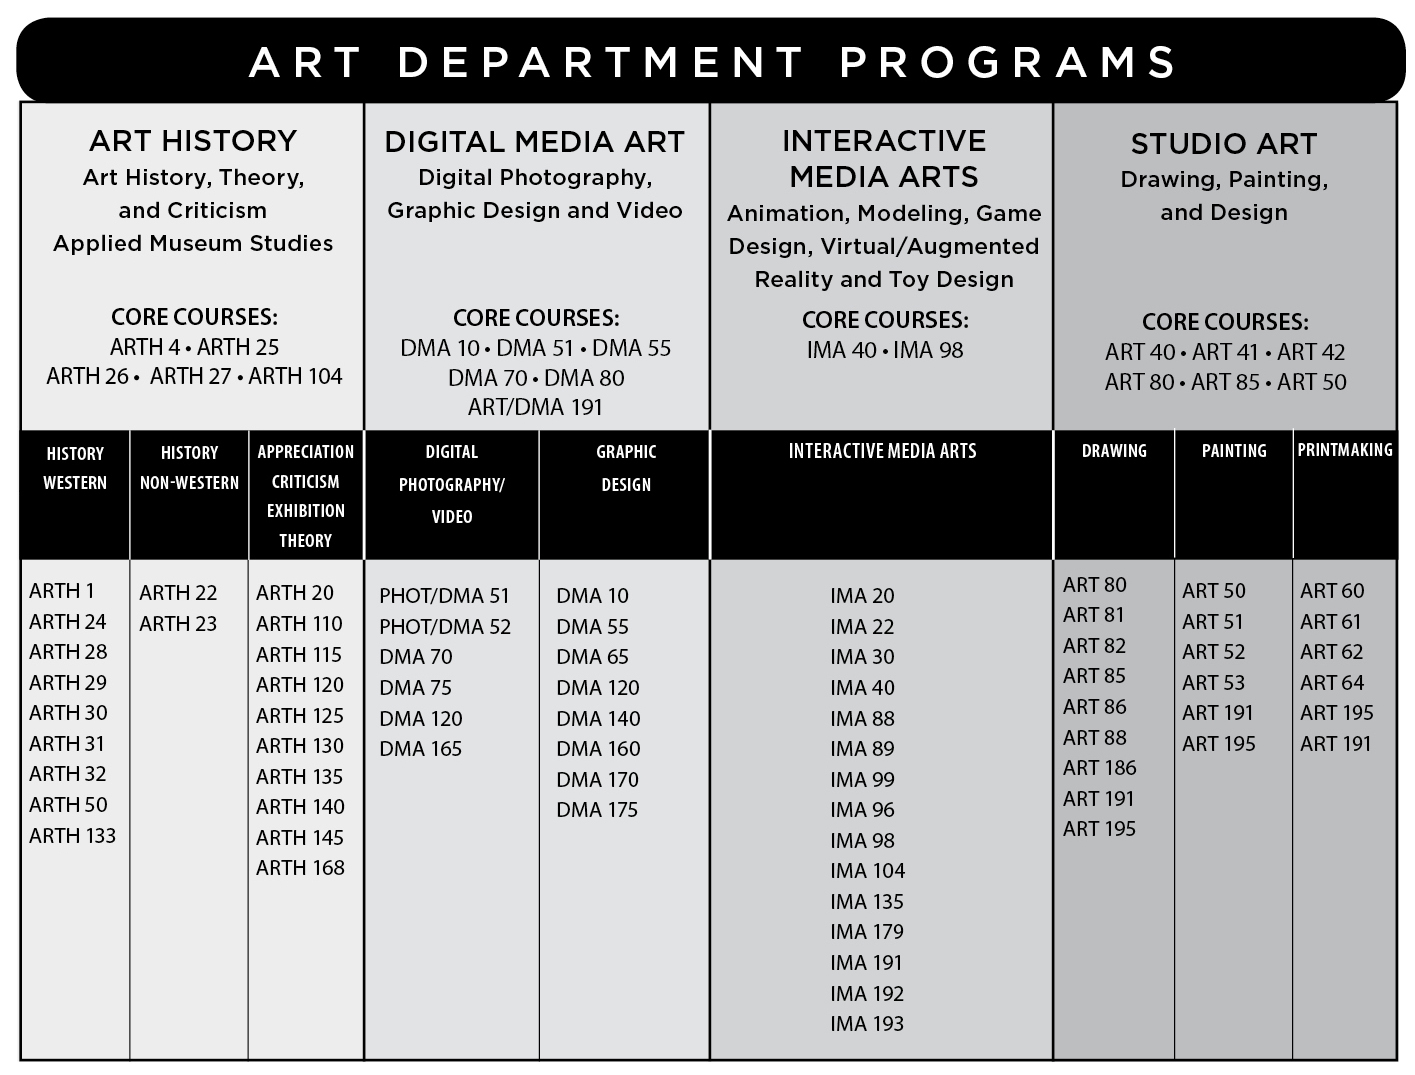 Graphical chart showing the programs and courses in the IVC art department.